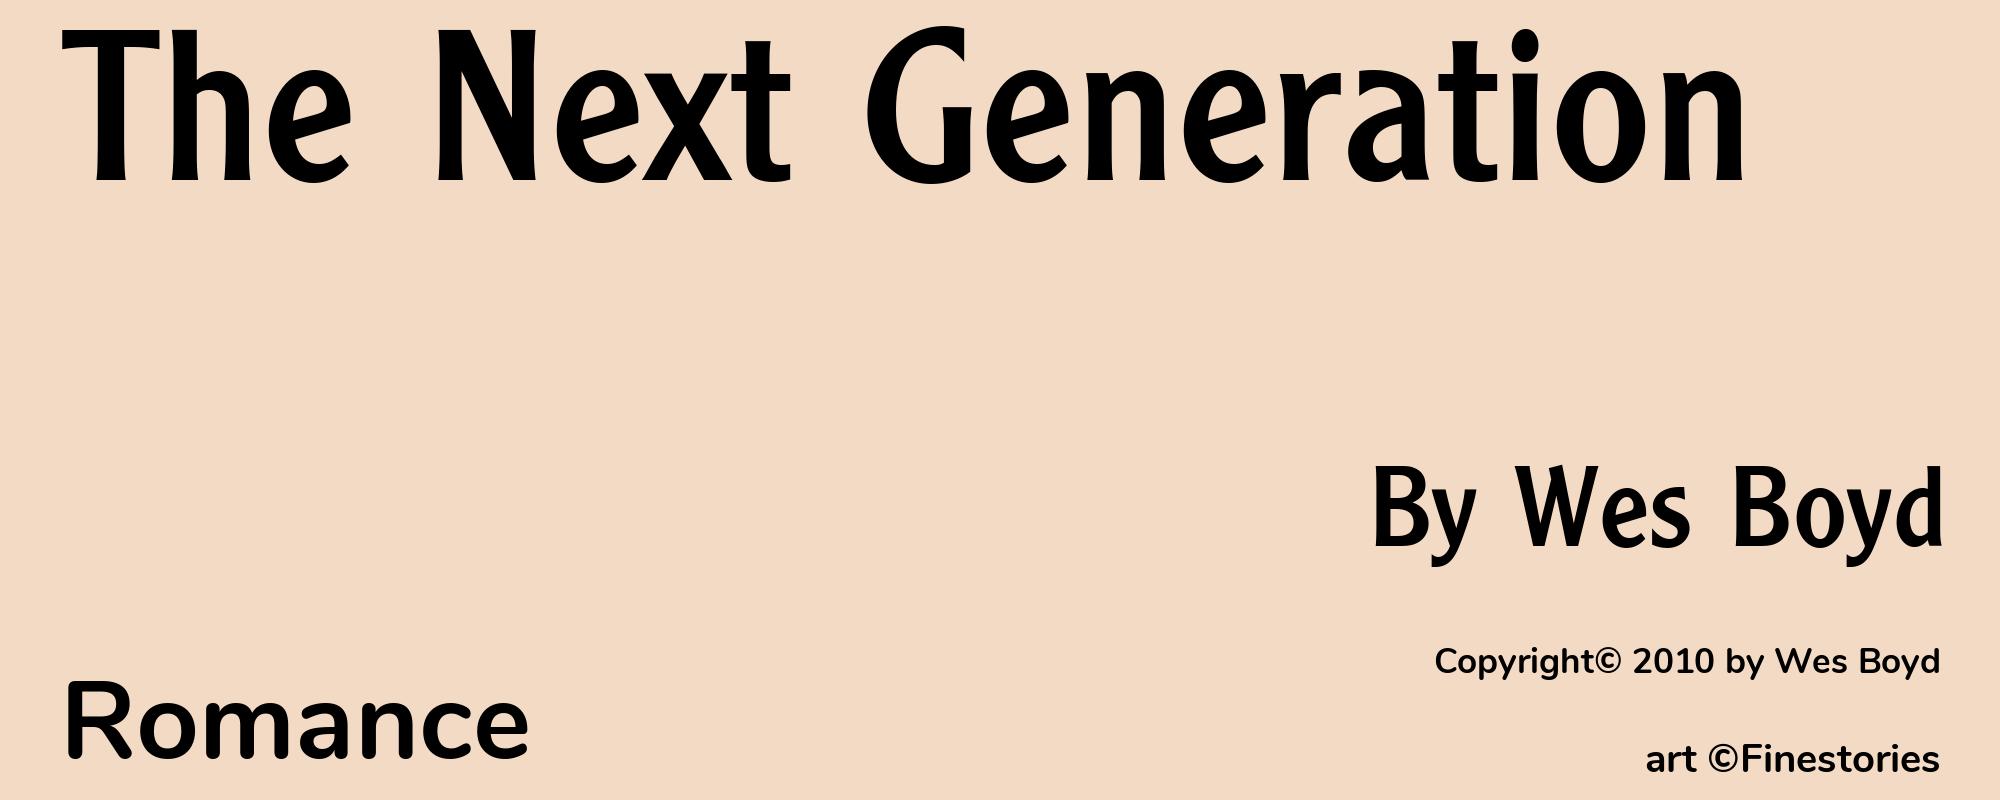 The Next Generation - Cover